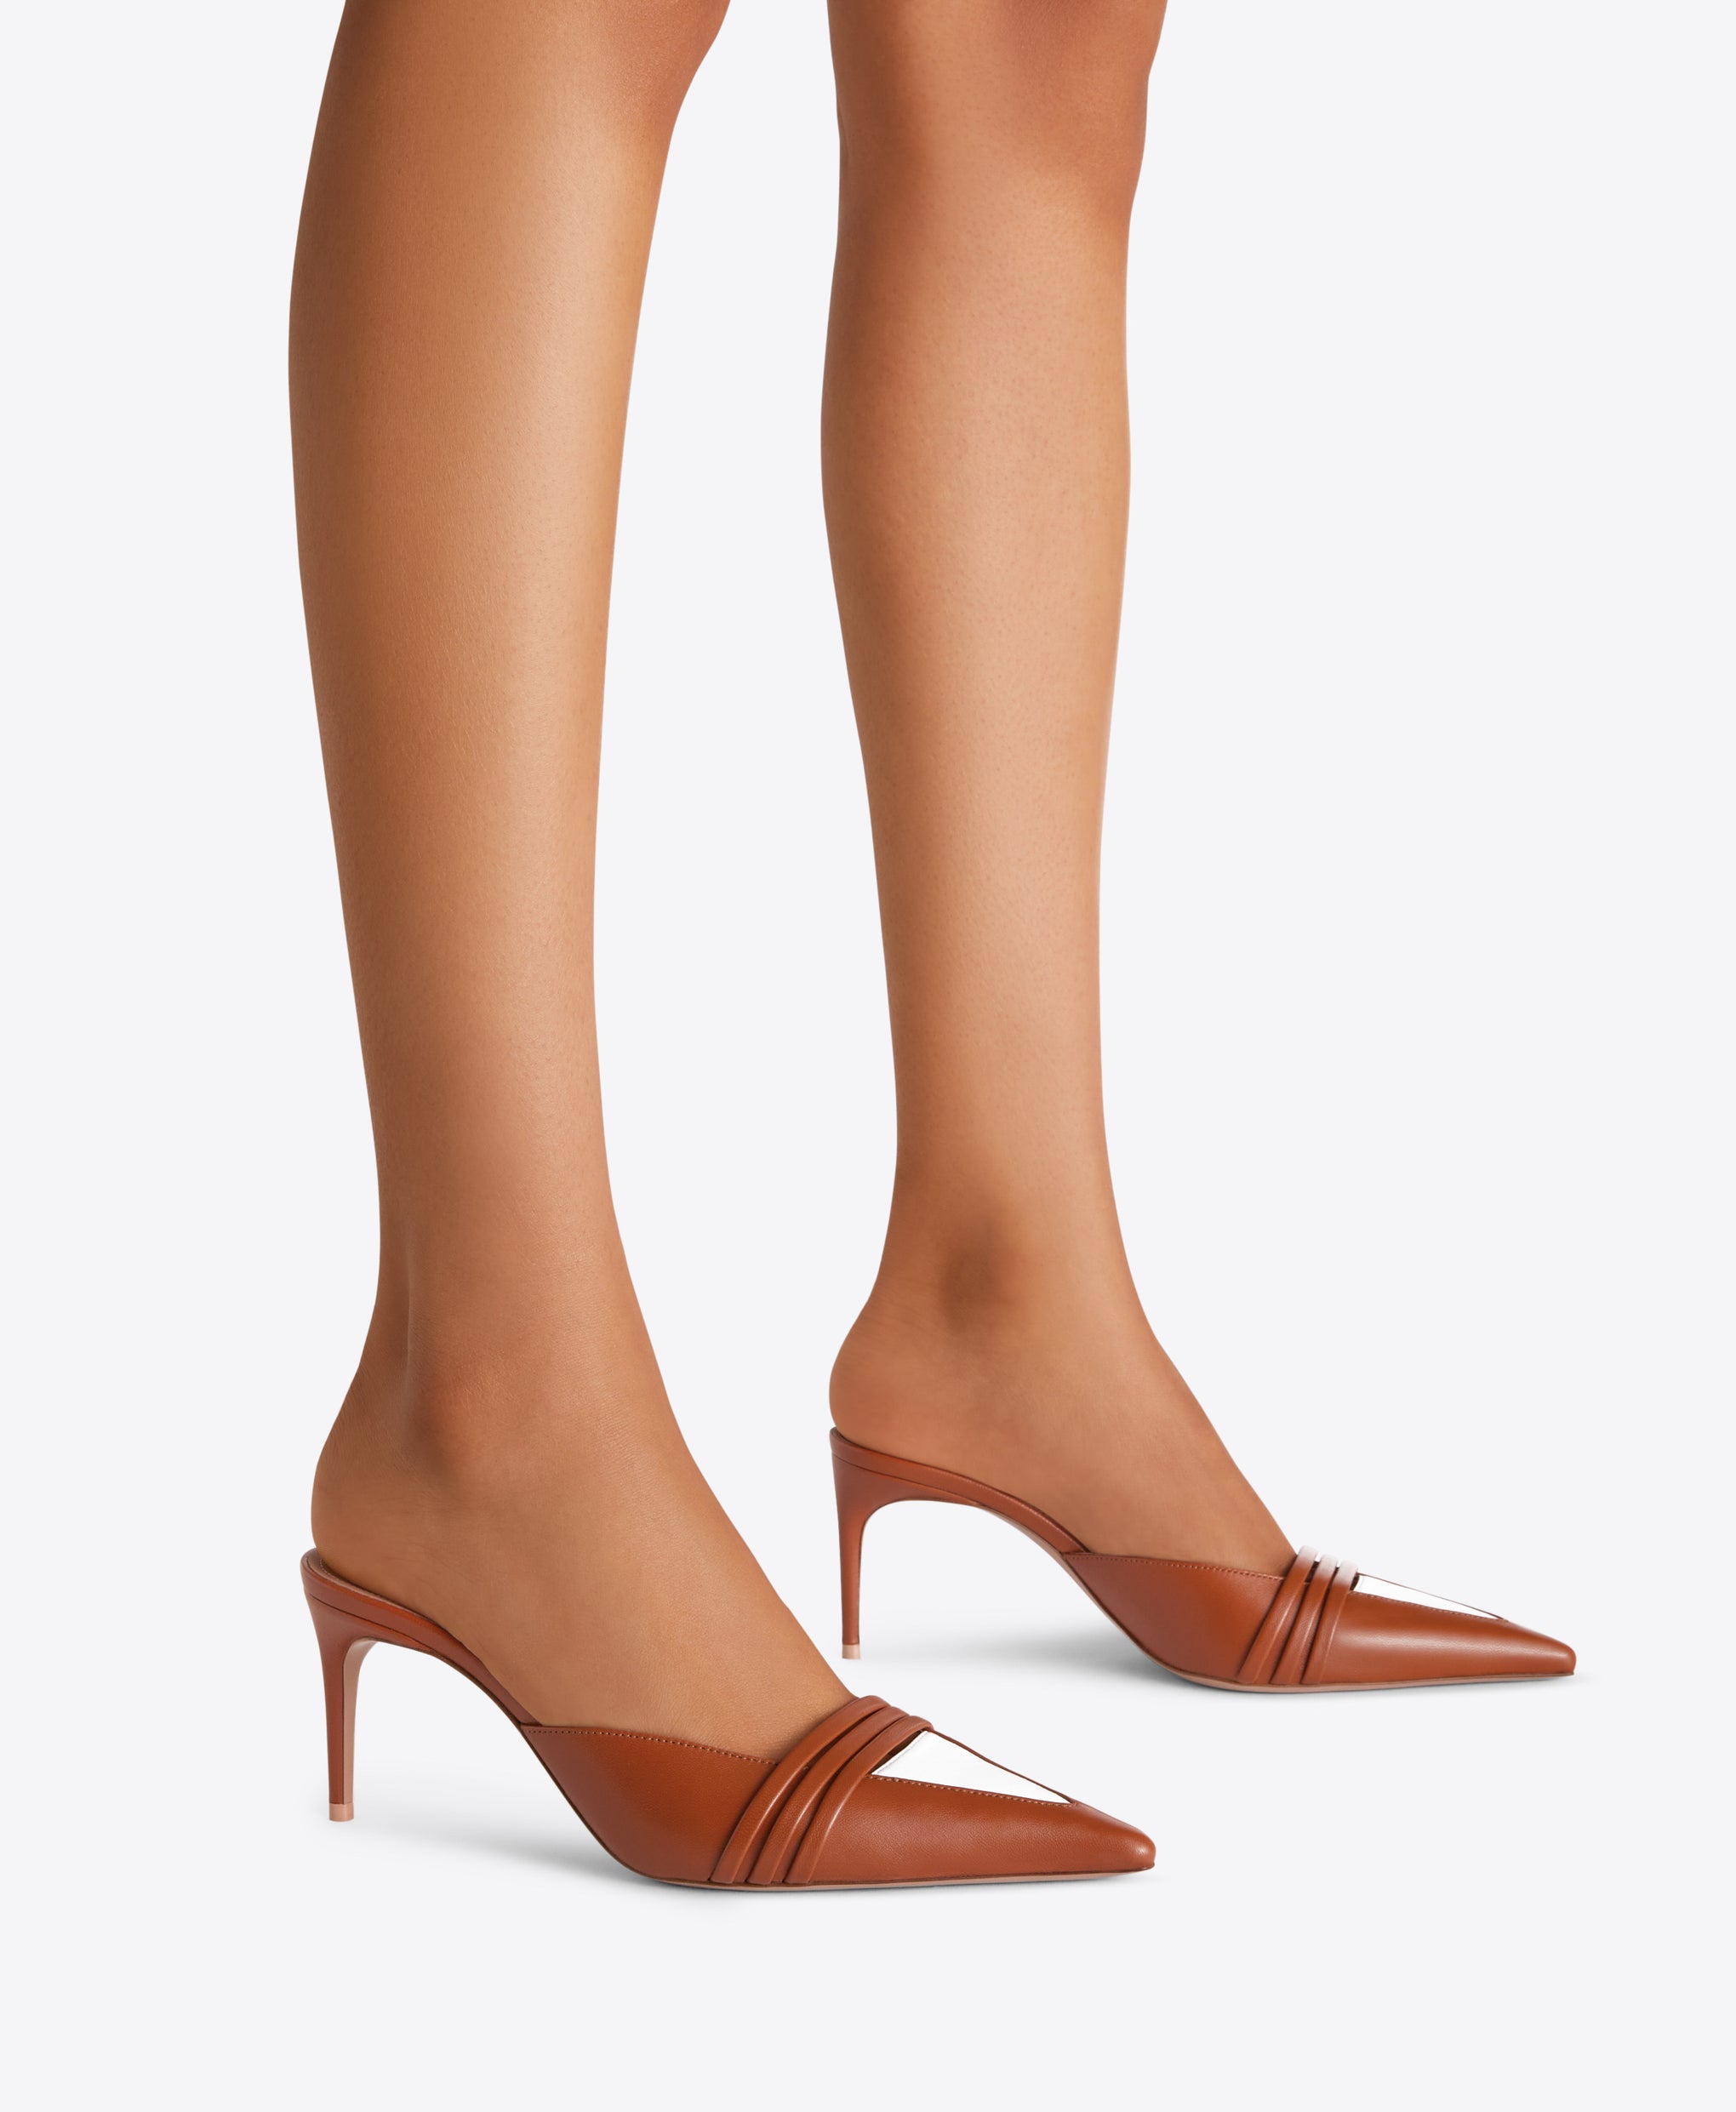 Taron 70 Tan Leather Mules with White Accent Malone Souliers